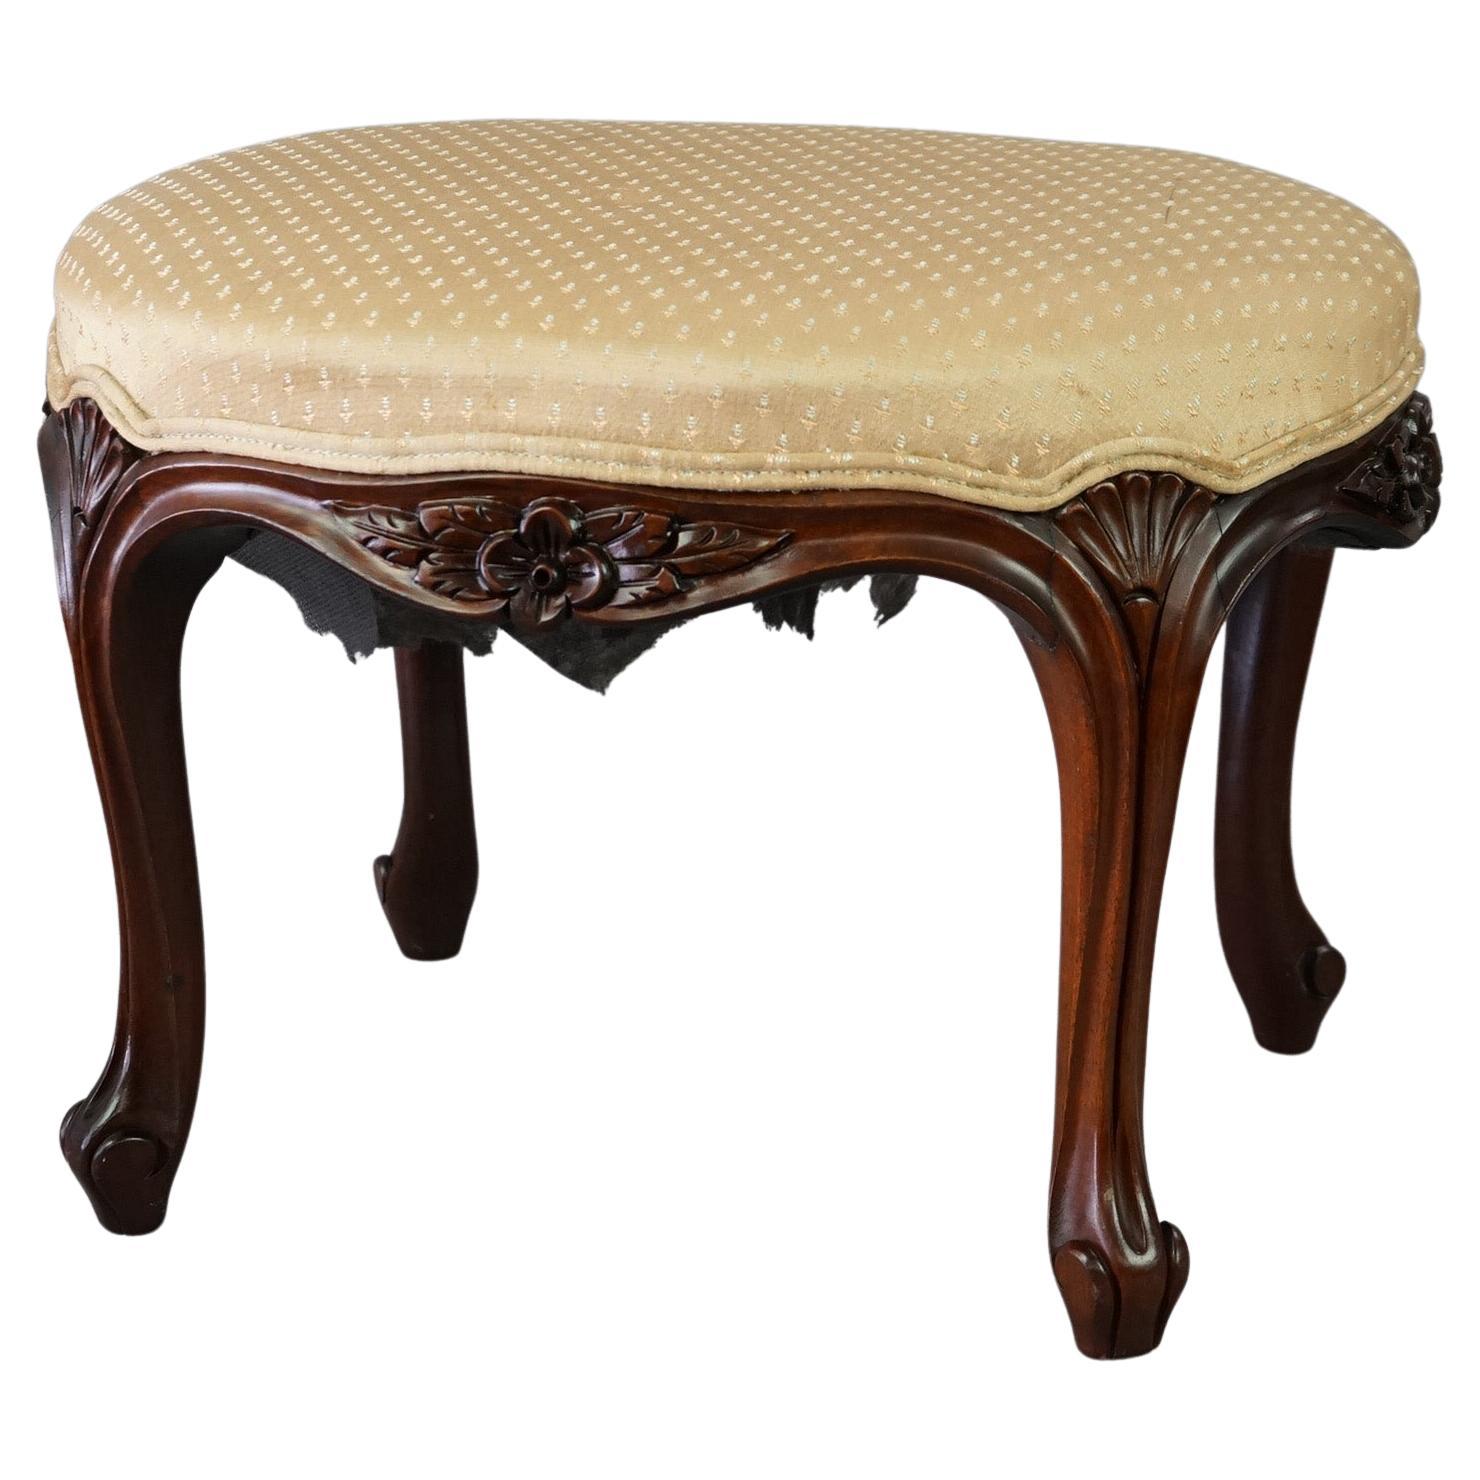 Antique French Louis XIV Oval Carved Walnut Footstool, circa 1900